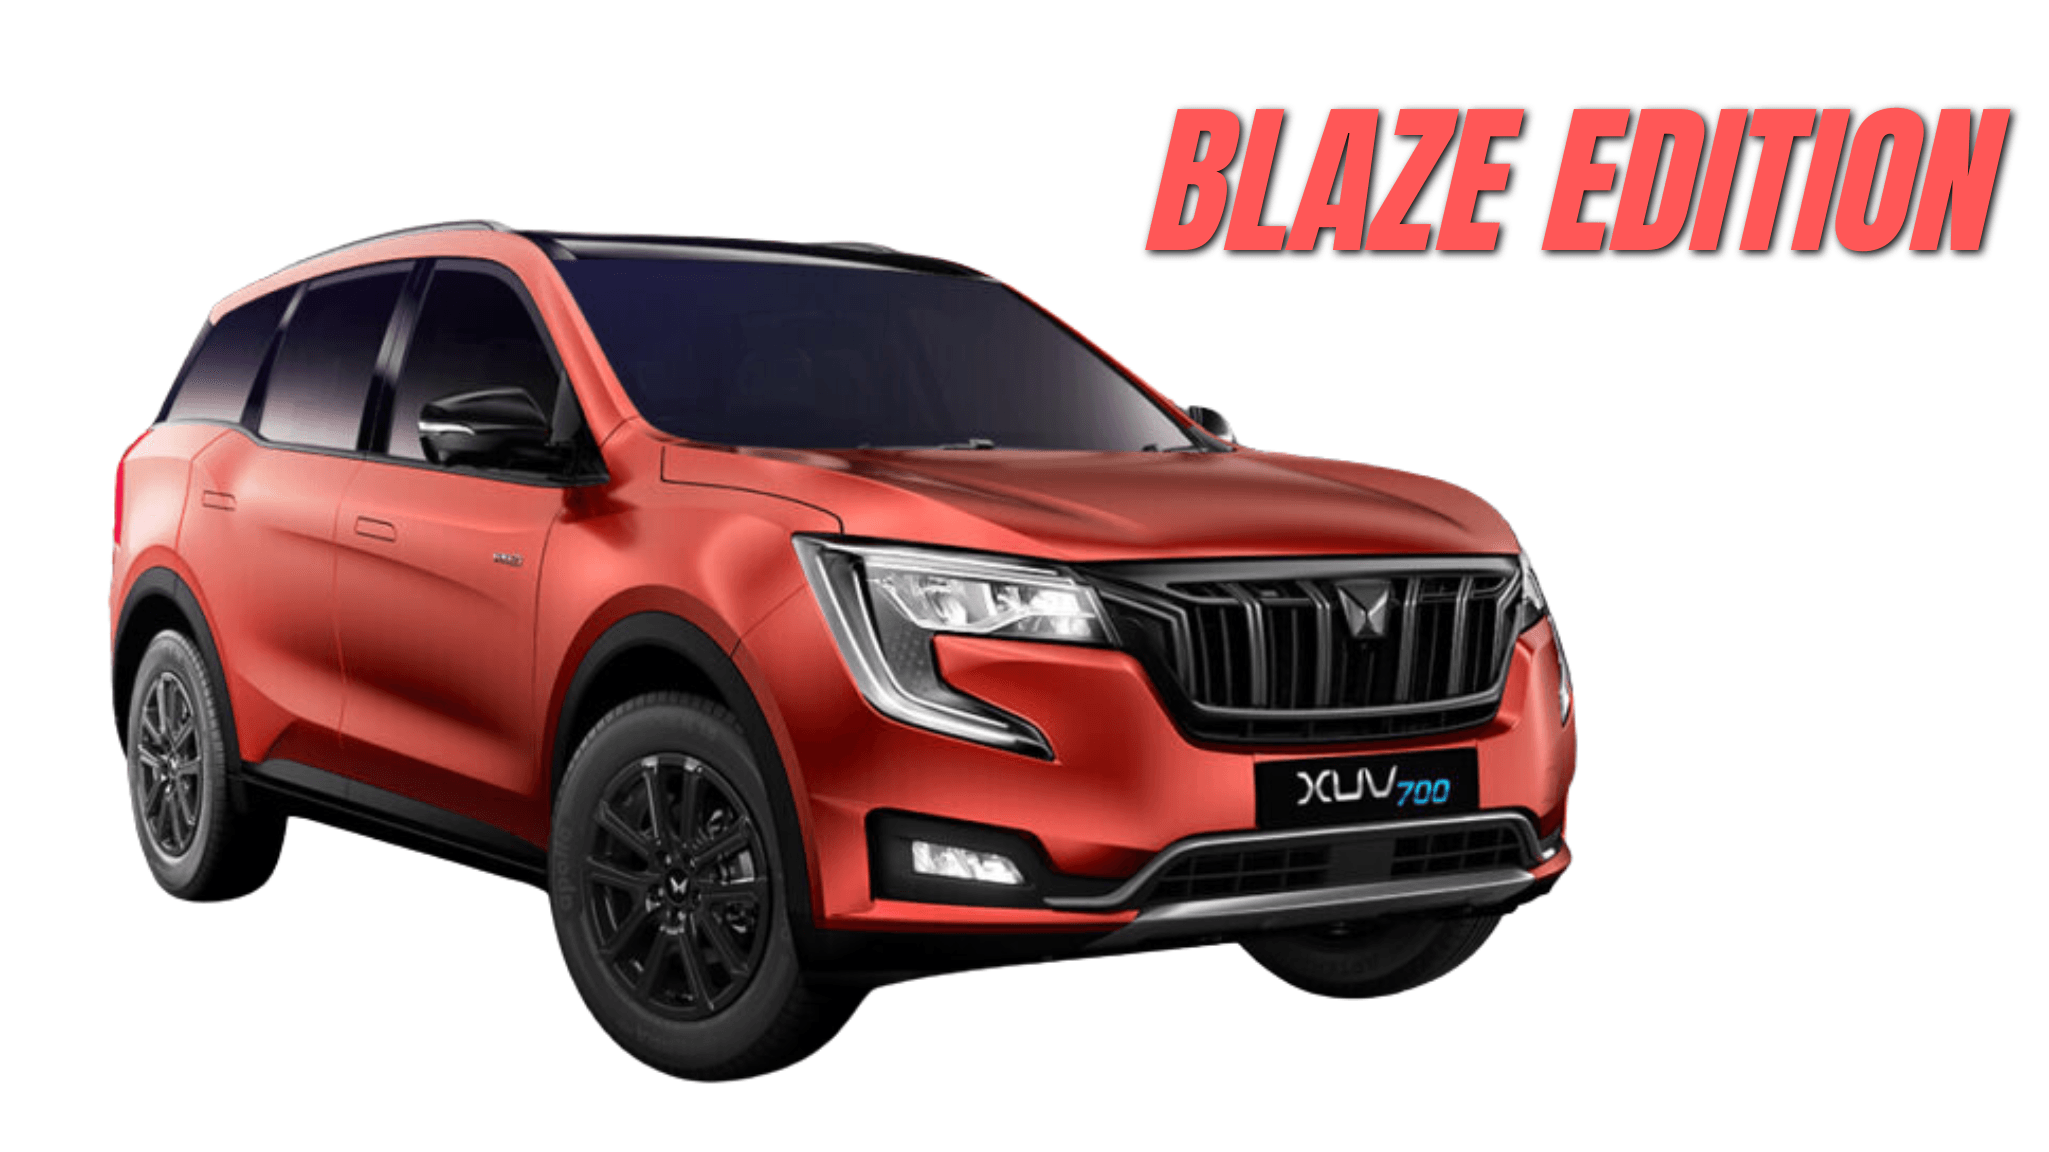 Mahindra XUV700 Blaze Edition Launched at ₹24.24 Lakh: What's New? news